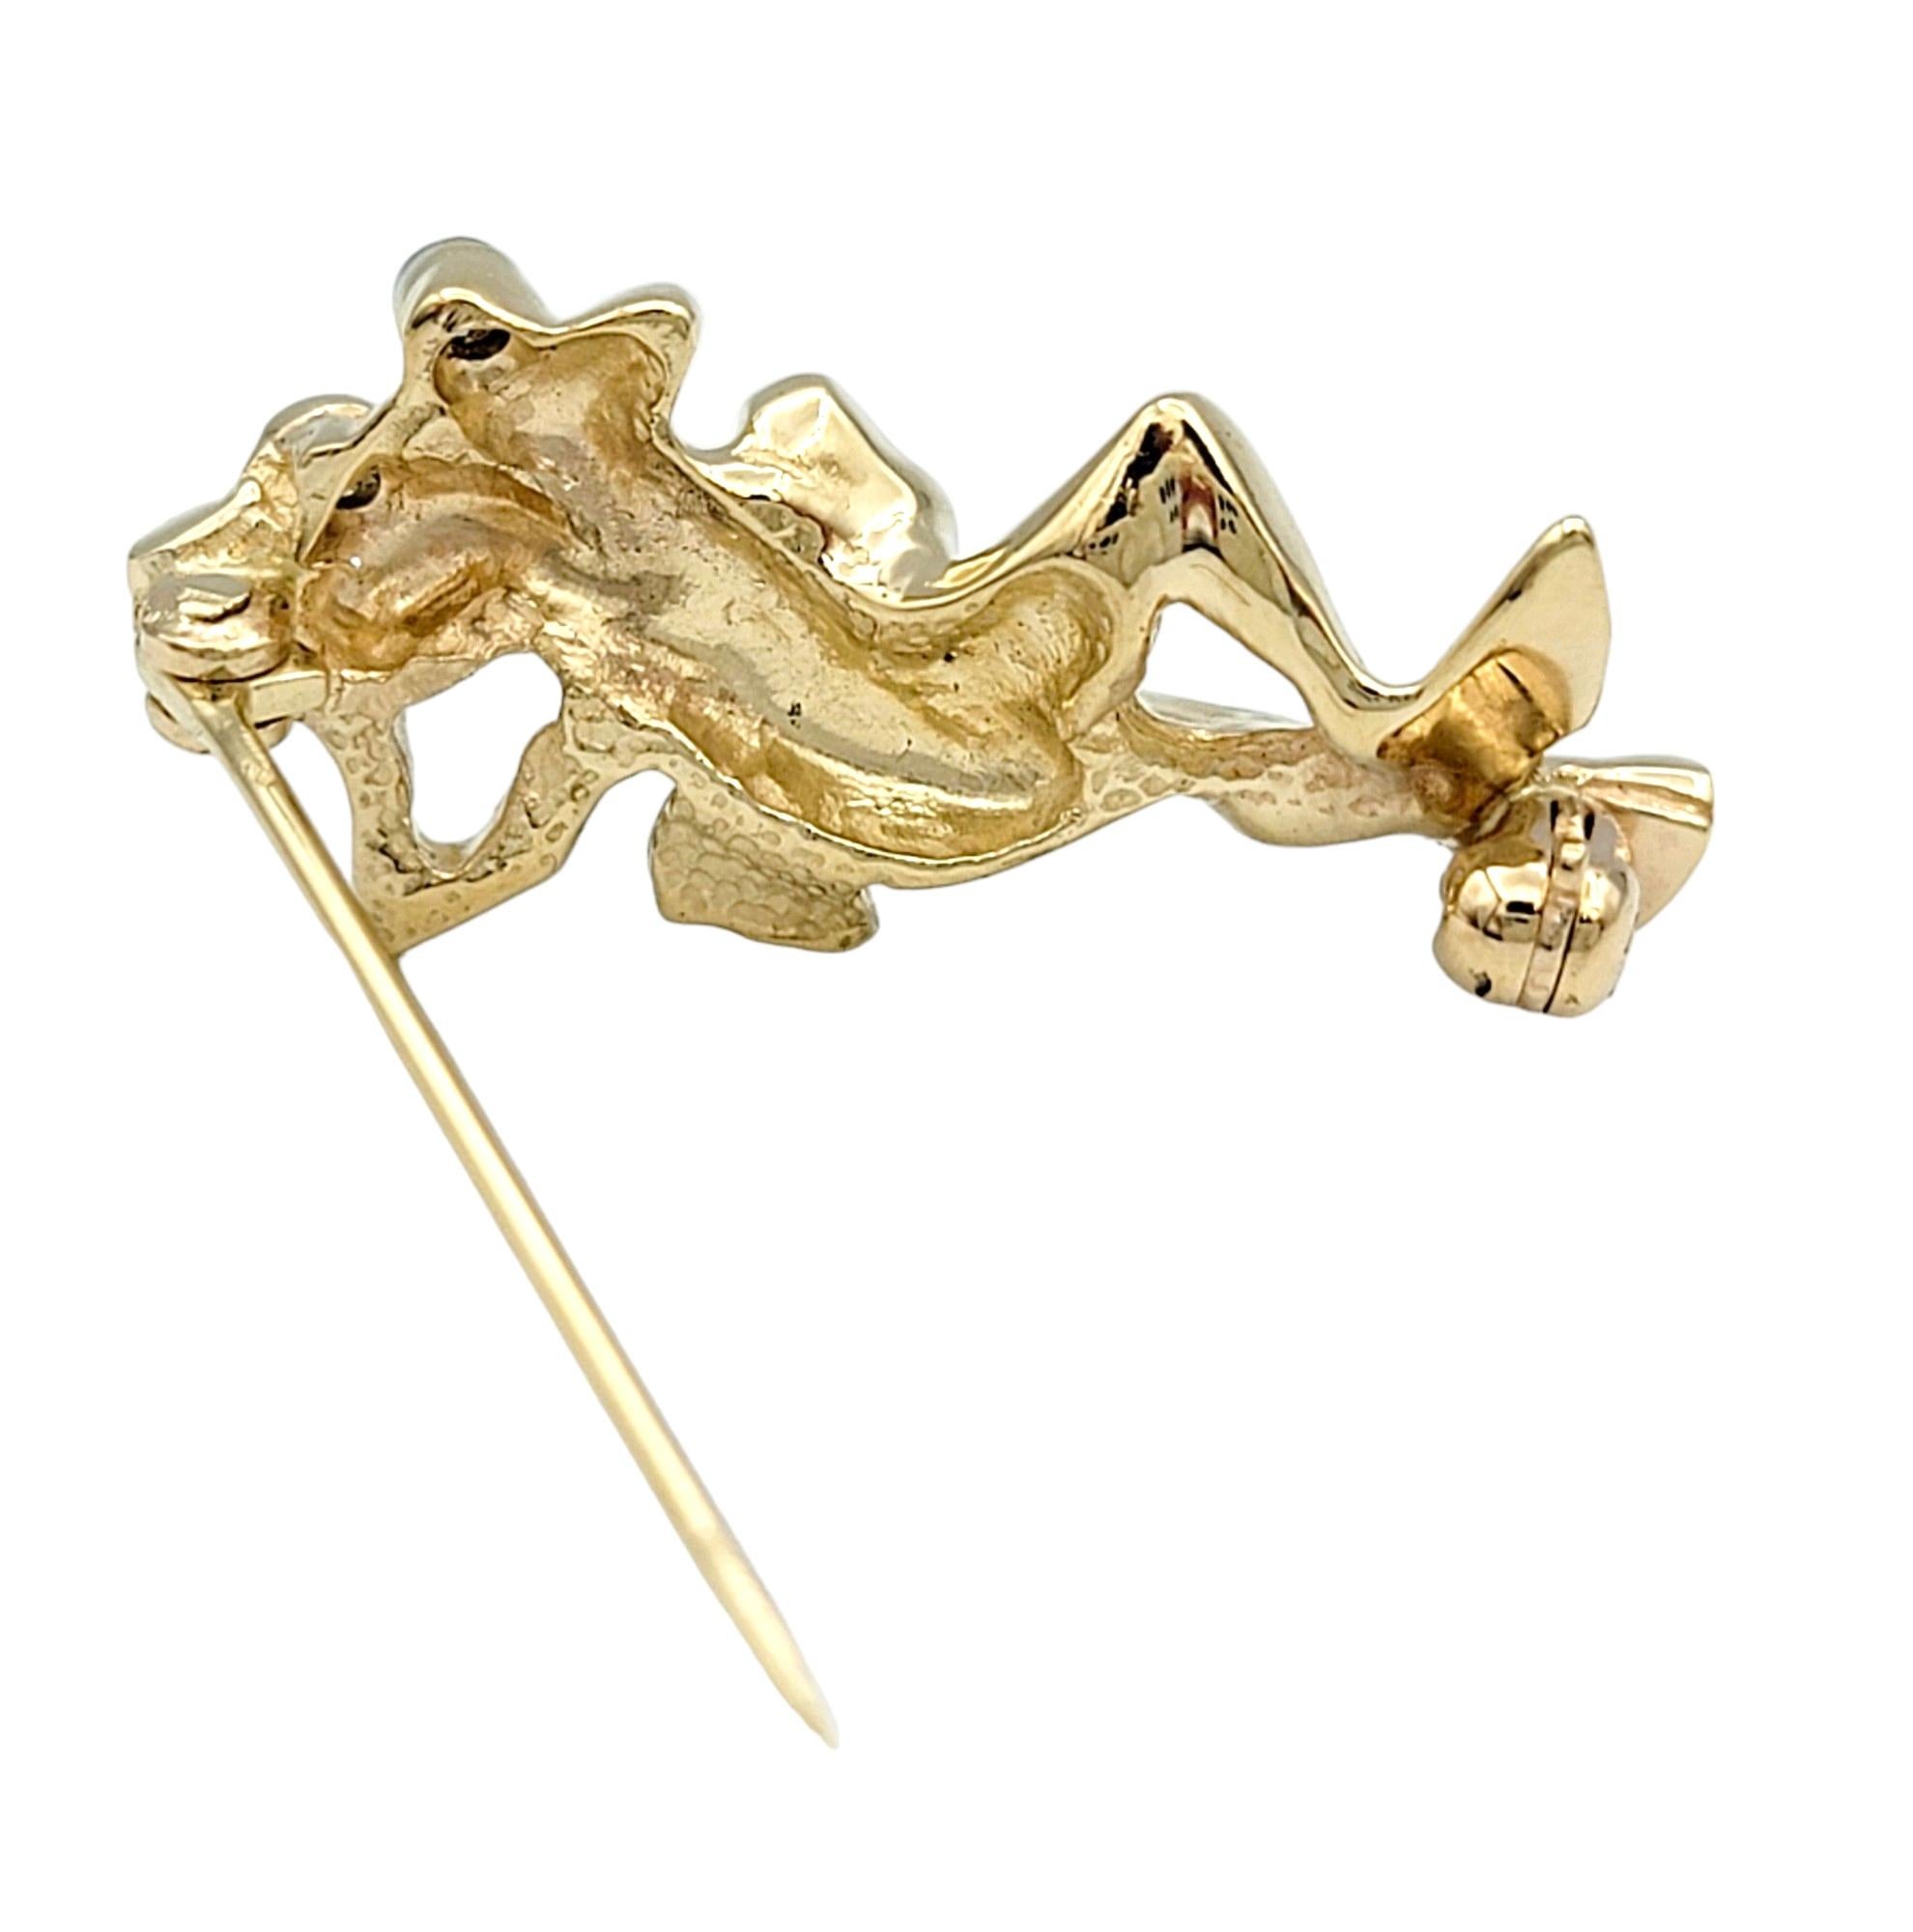 Lounging Frog with Diamond Eyes Brooch Pin Set in 14 Karat Yellow Gold In Good Condition For Sale In Scottsdale, AZ